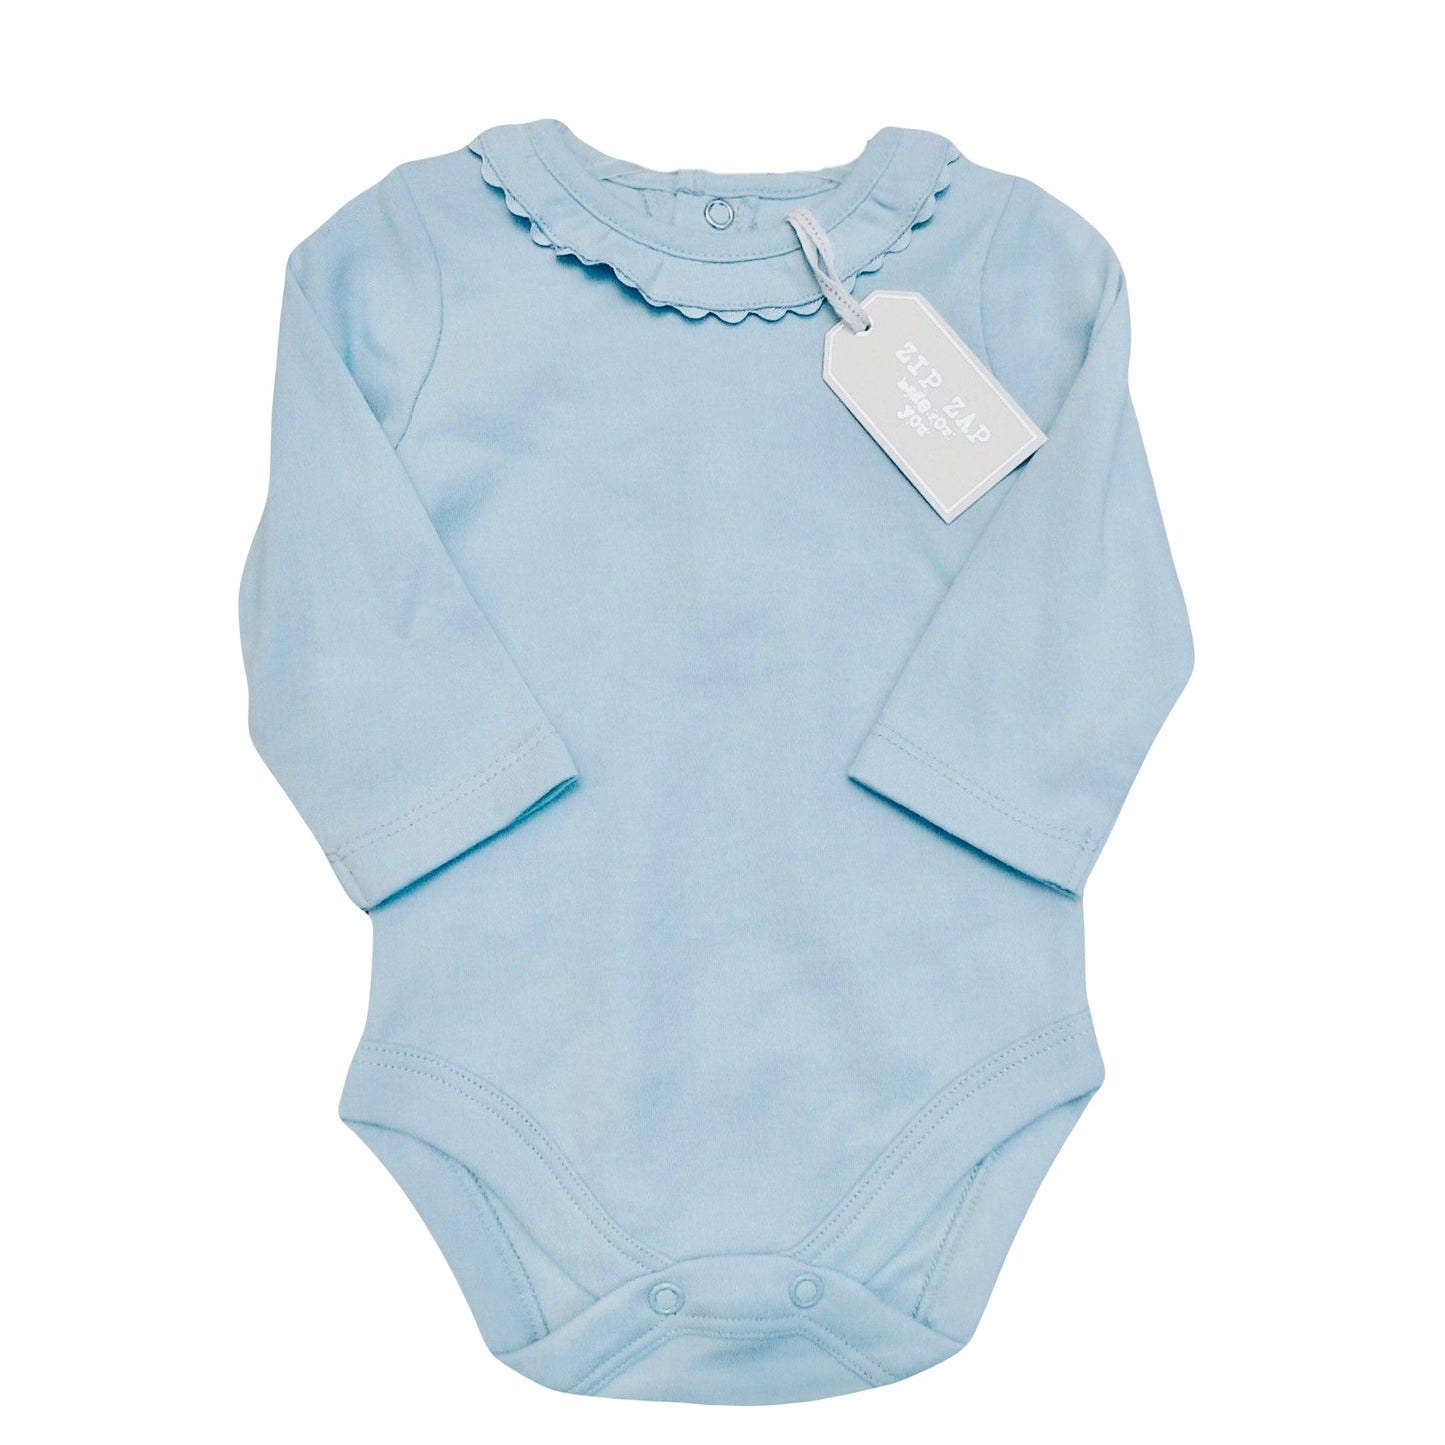 Baby Long Sleeve Scallop Collar Bodysuit | Oscar & Me | Baby & Children’s Clothing & Accessories